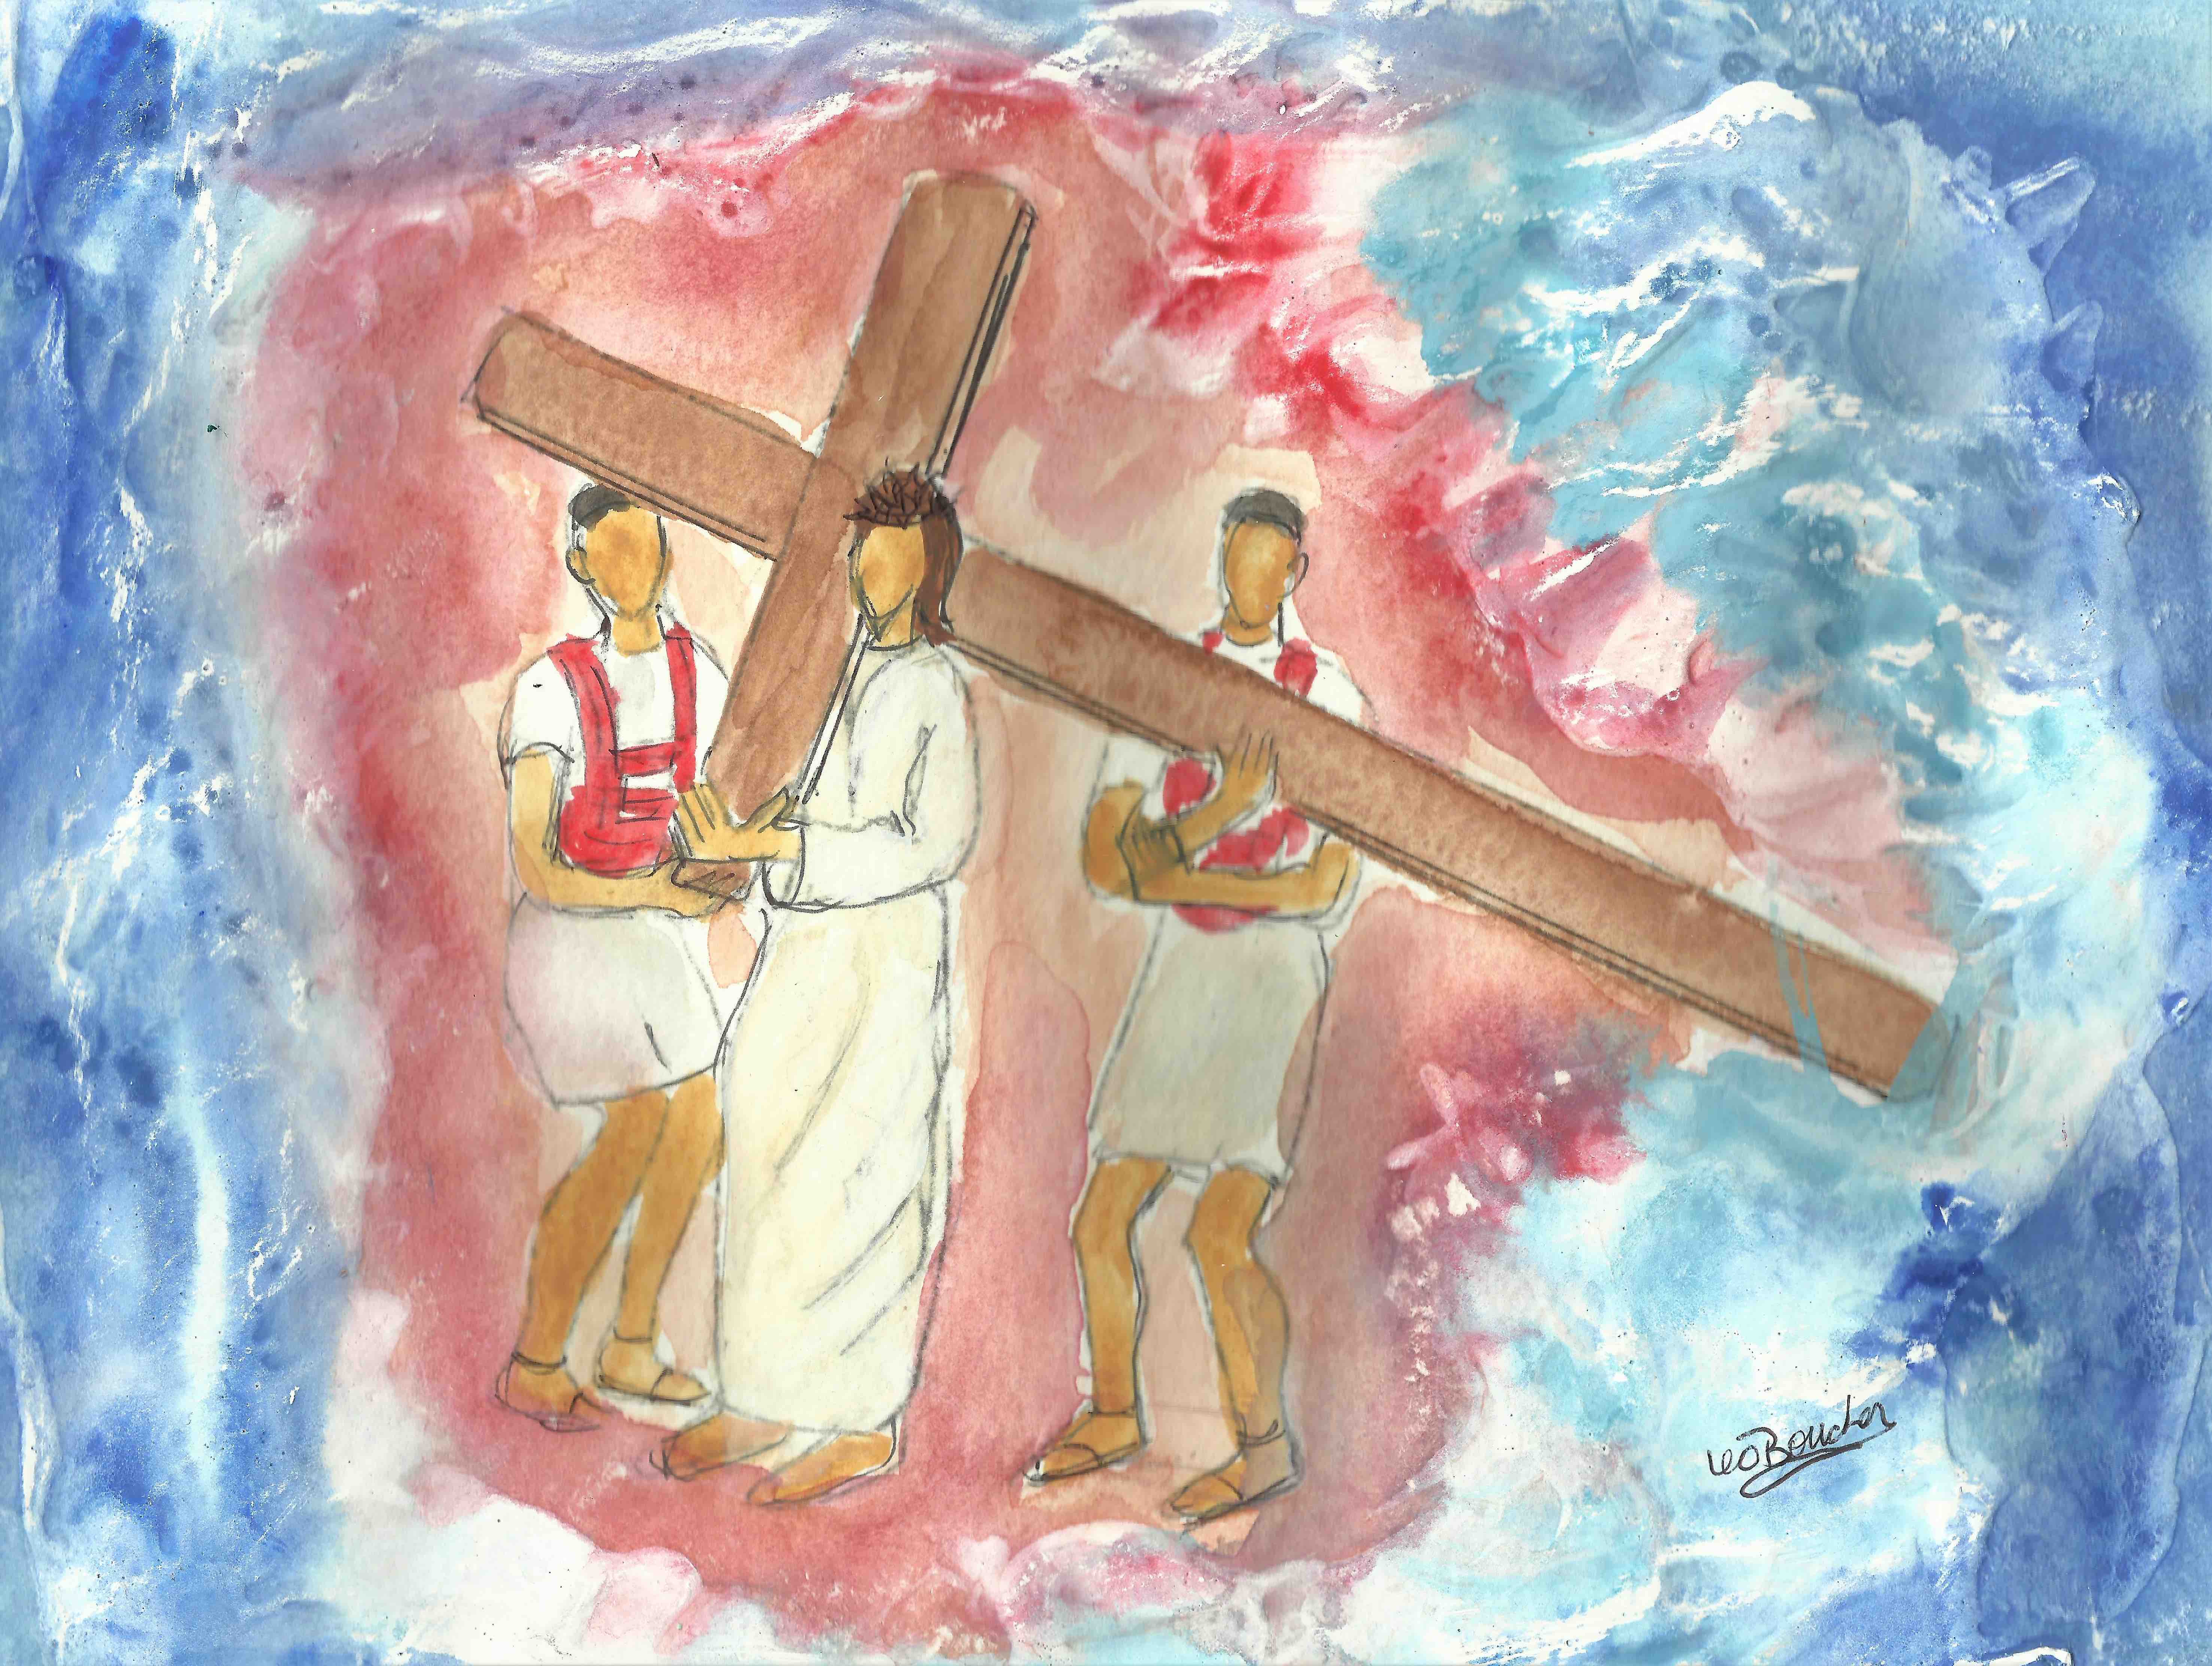 A watercolor rendition of Jesus carrying his cross with 2 soldiers helping him, with splotches of red and blue surrounding the three figures.]